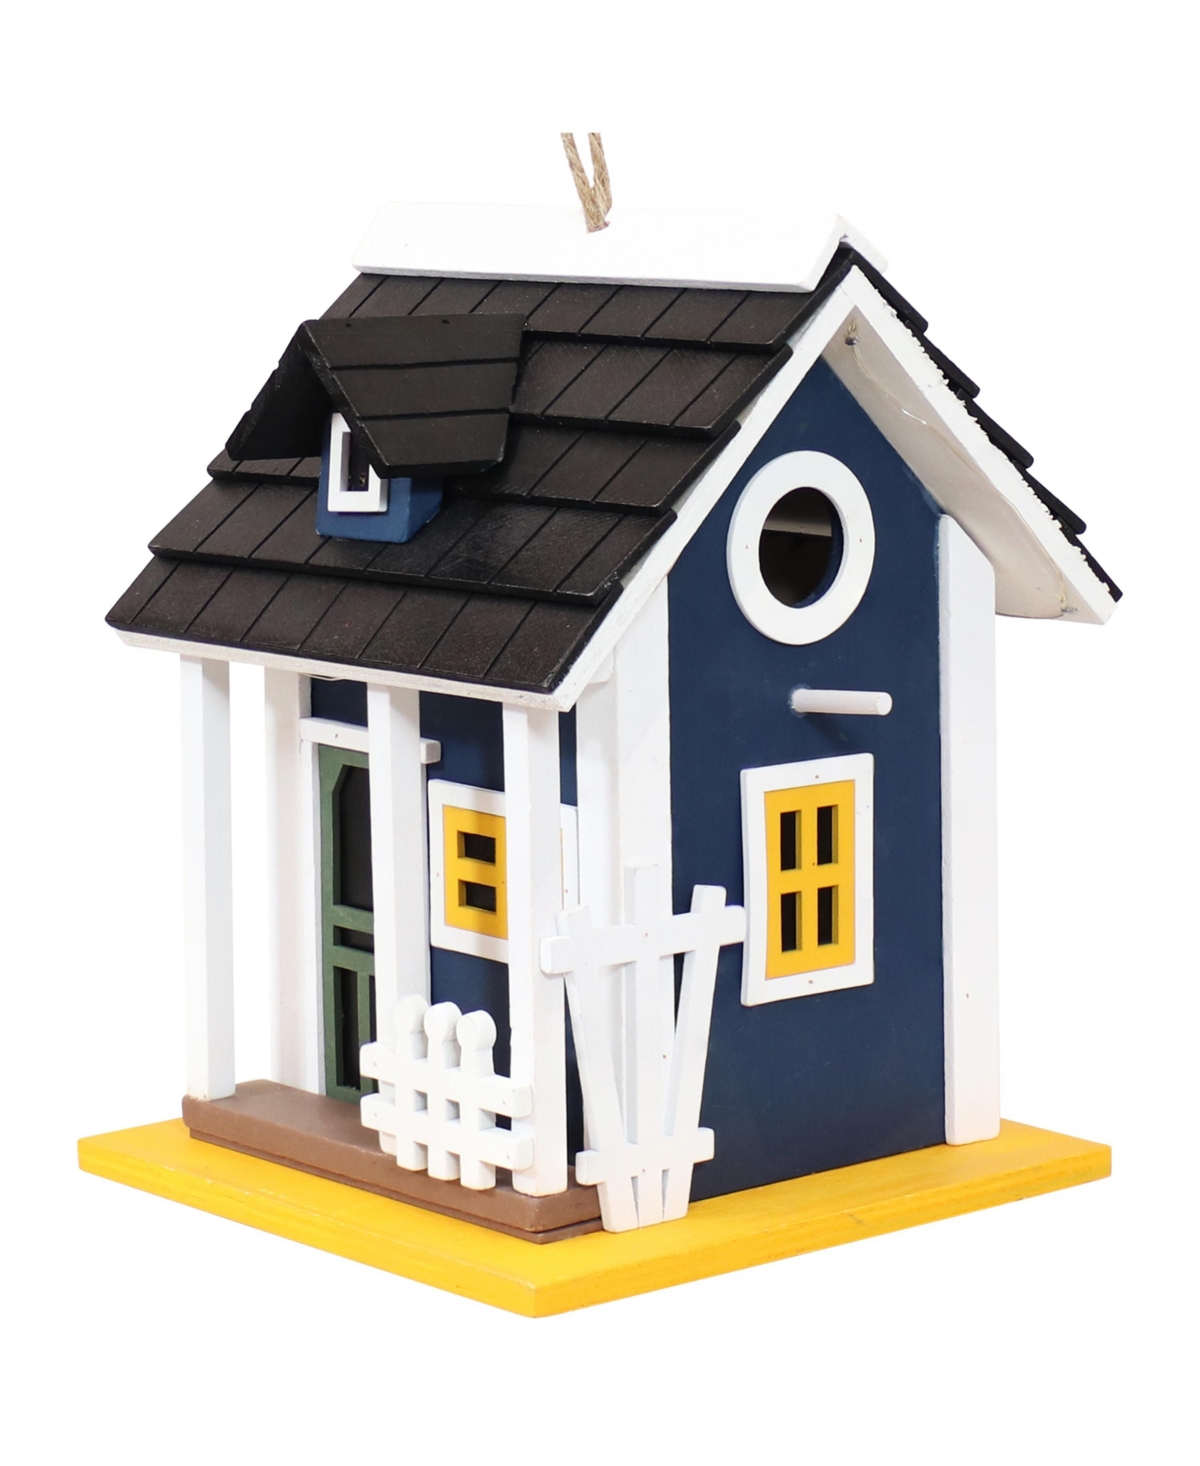 9.25 in Wooden Cozy Home Birdhouse with Solar Led Light - Blue - Dark blue